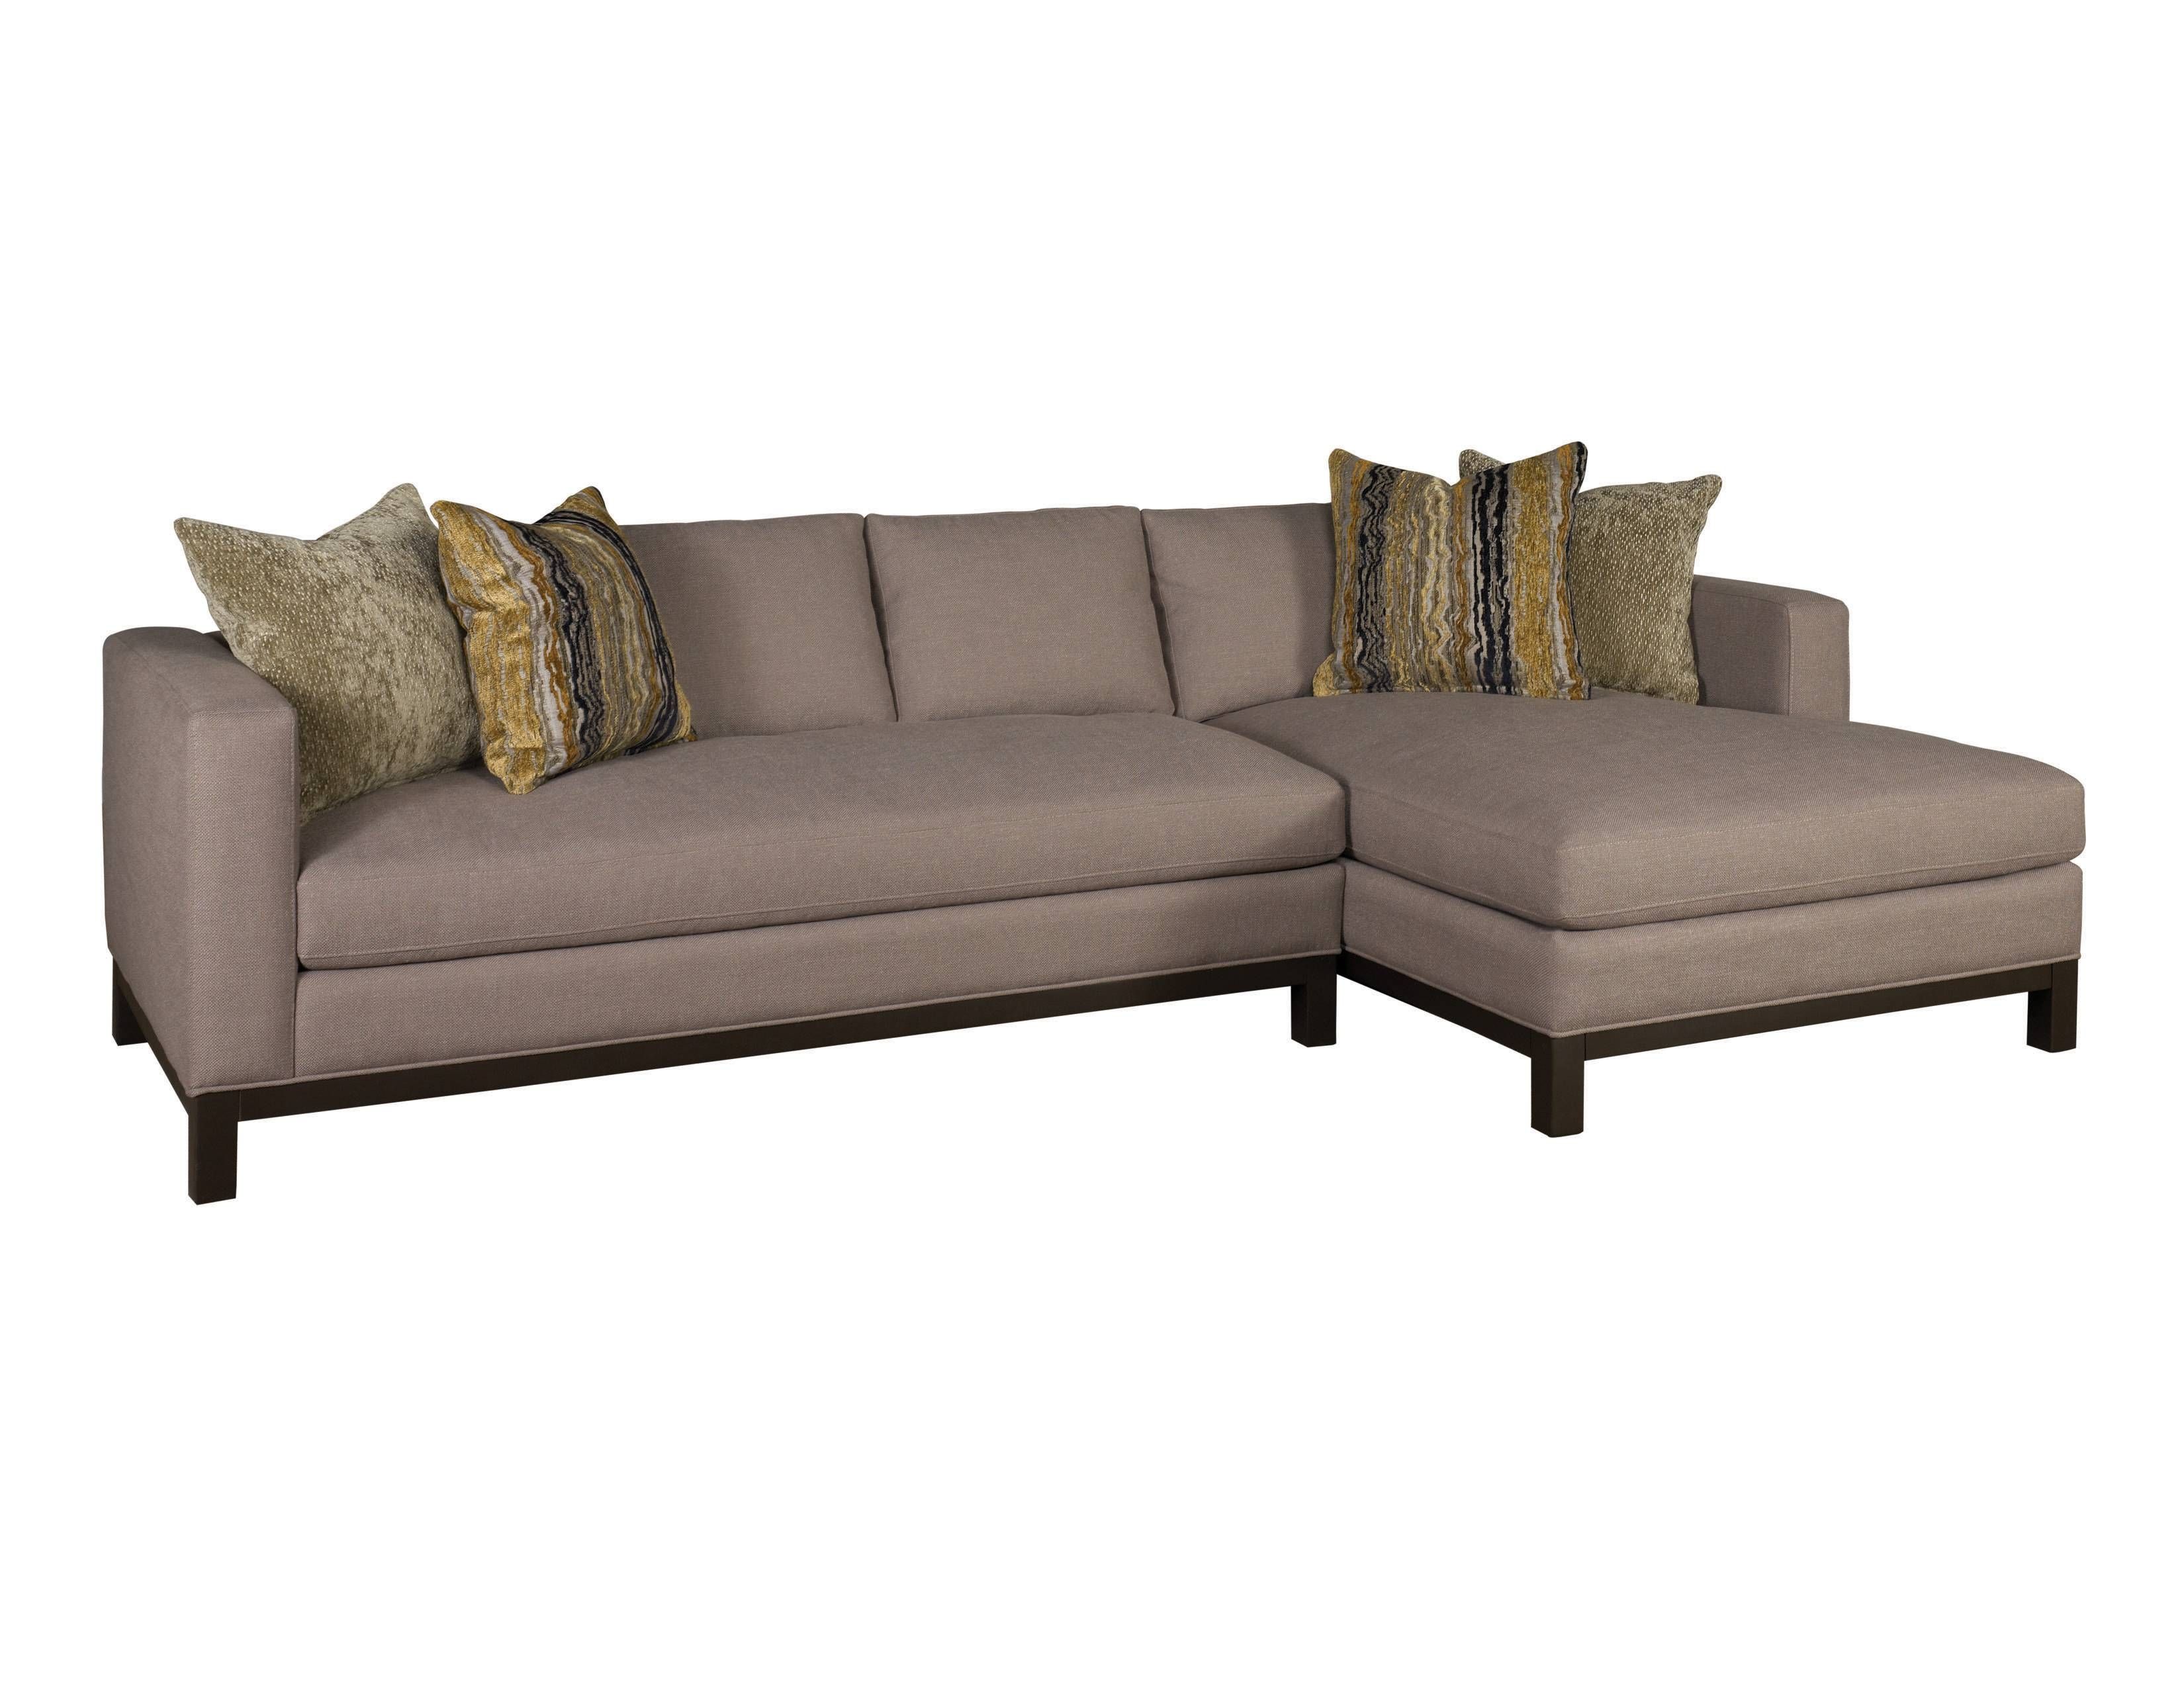 Best Sectional Sofas San Diego 57 About Remodel Sectional Sofas Throughout Sofas Indianapolis (View 7 of 25)